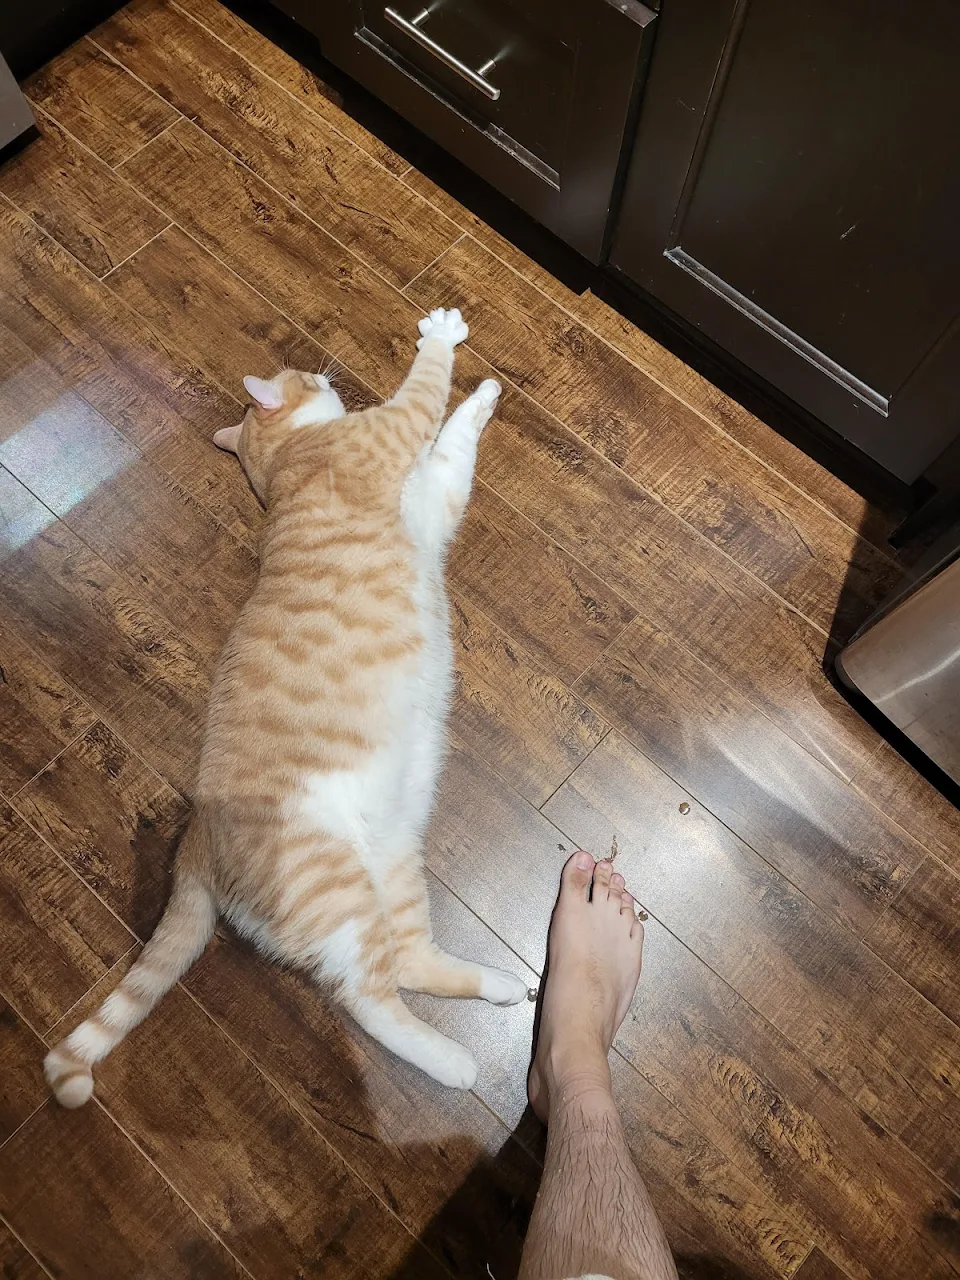 My XL cat. men's size 10 foot for scale.